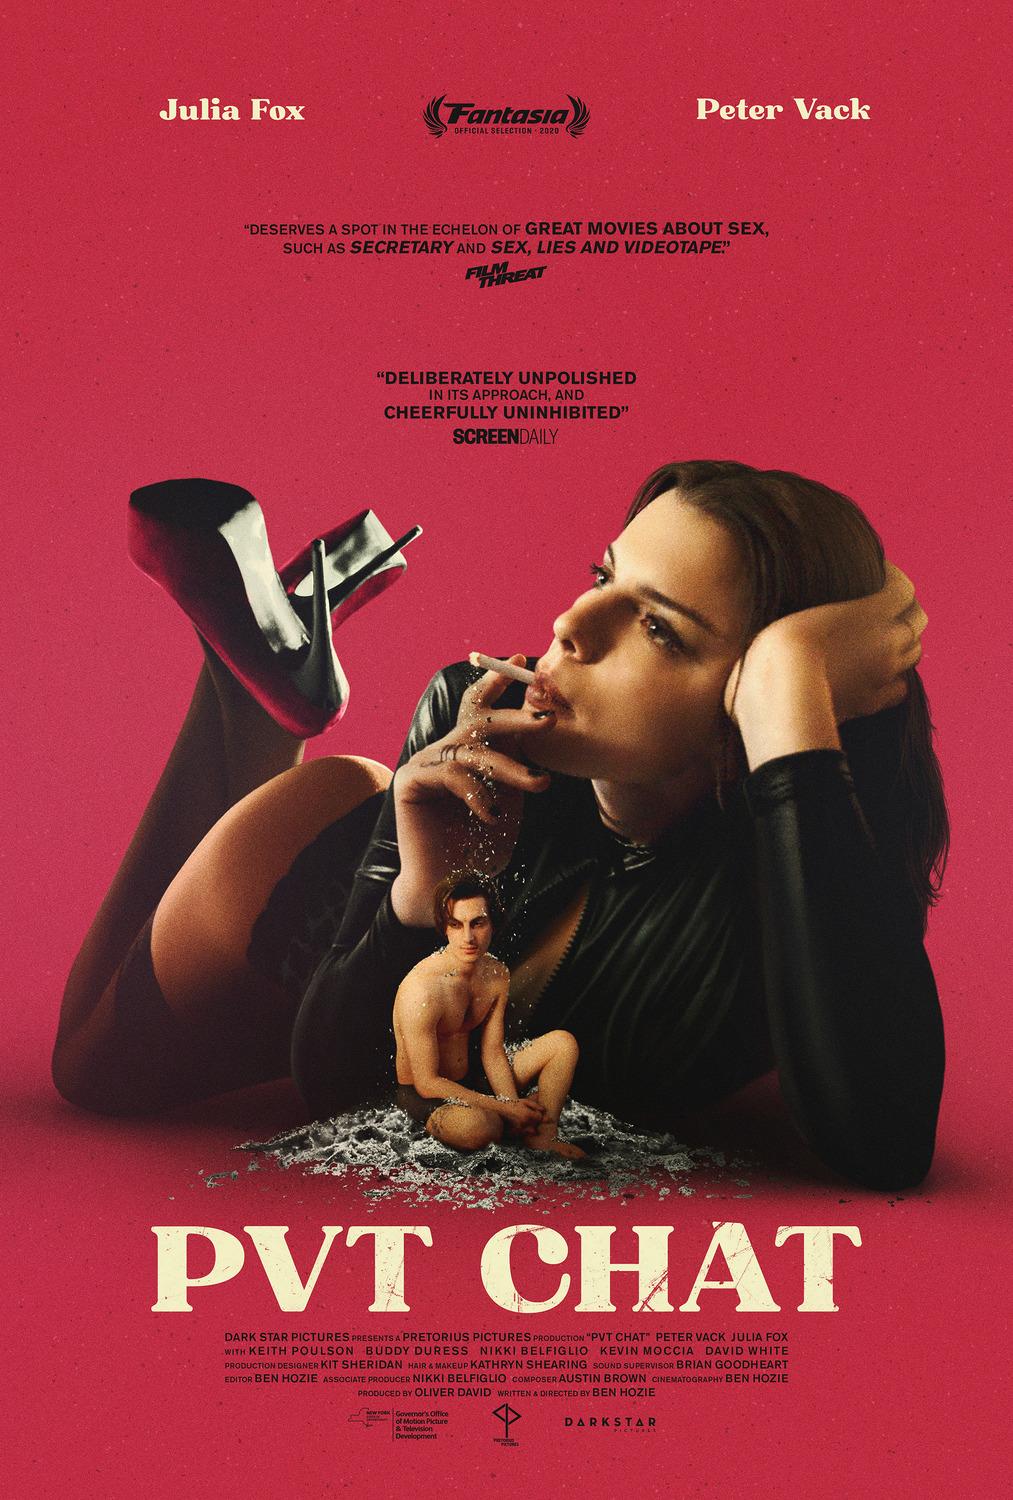 PVT CHAT (2020) Hindi (Voice Over) Dubbed + English [Dual Audio] WEBRip 720p Watch PVT CHAT Full Movie Online on KatMovie18.com .